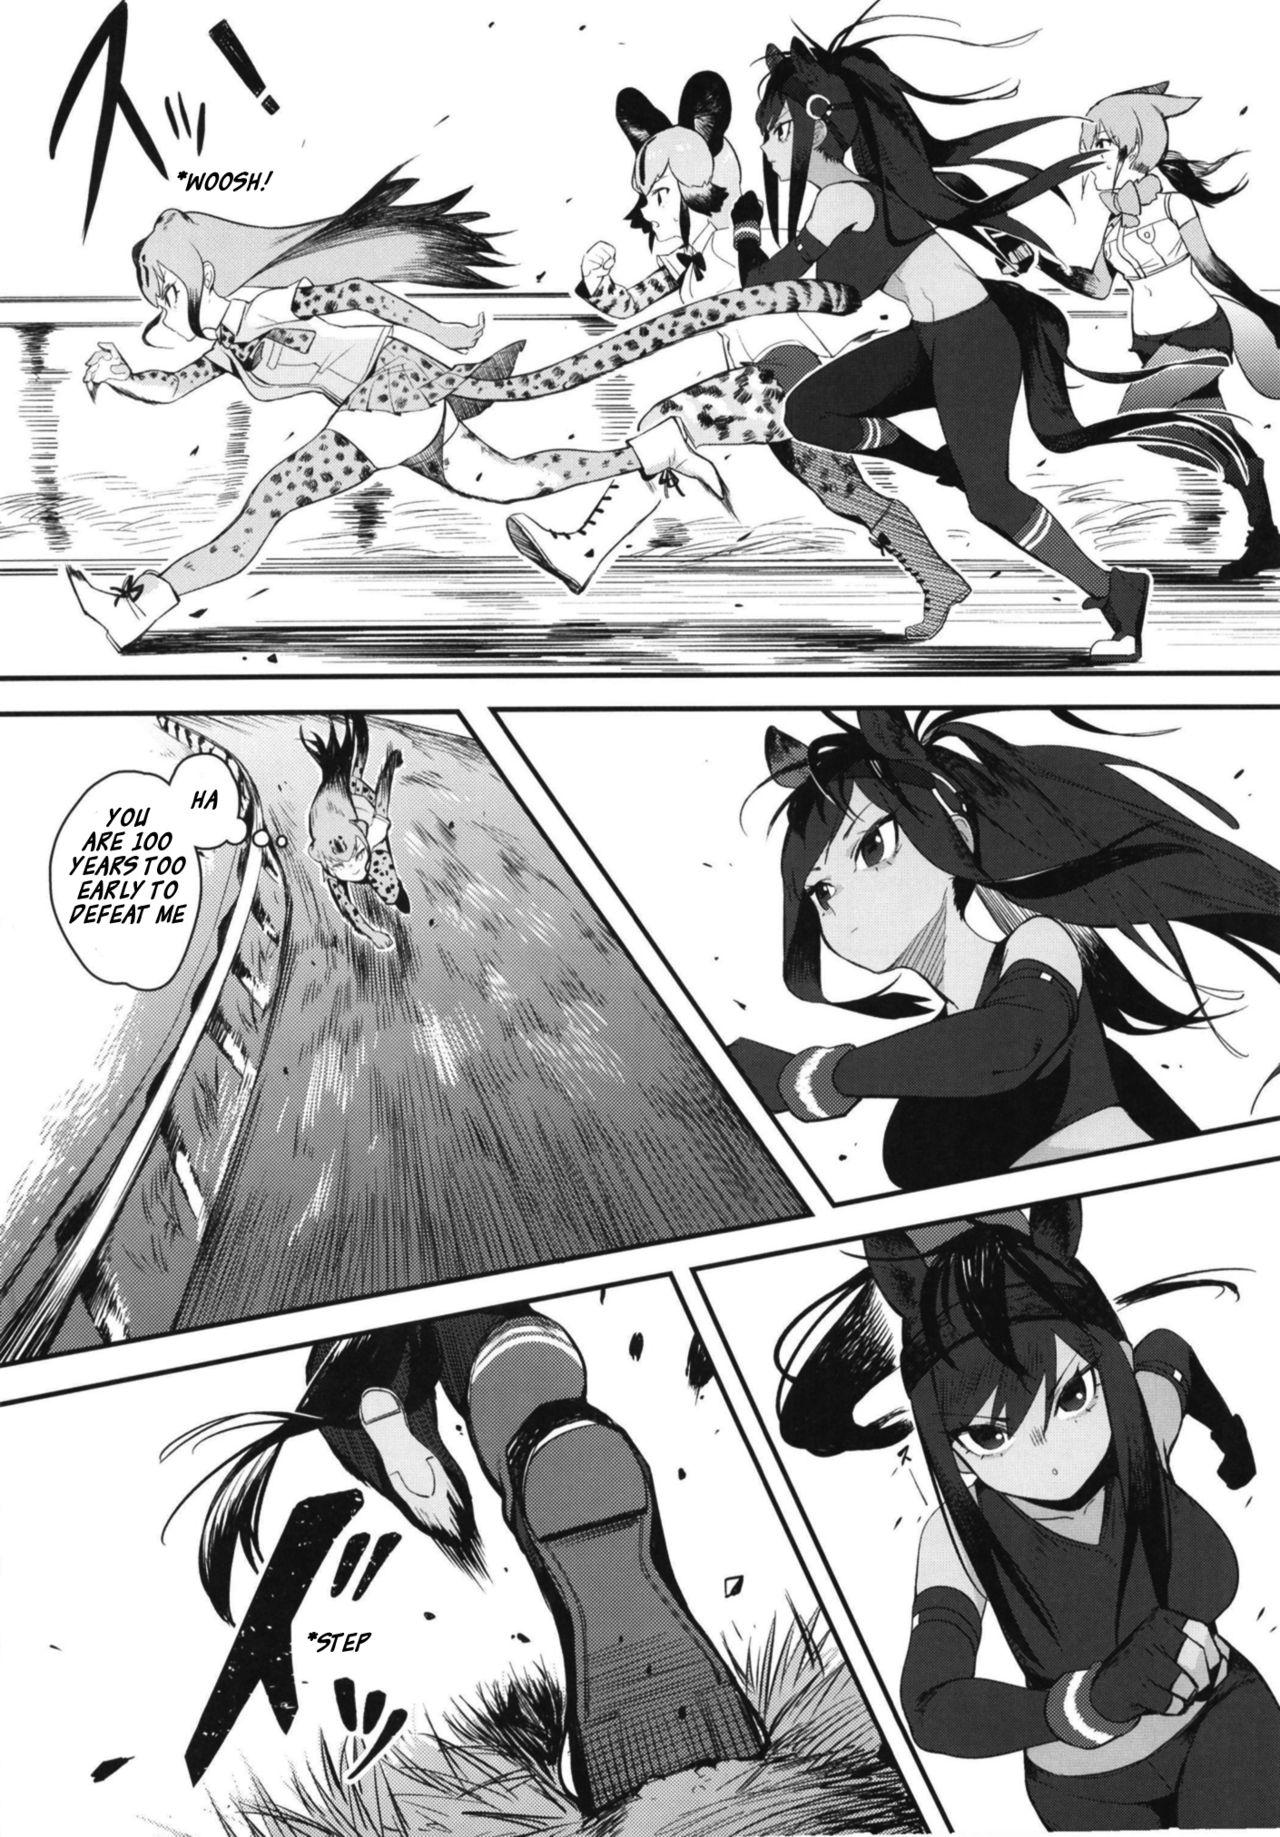 Eating Thoroughbred Early Days 2 - Kemono friends Girl - Page 4